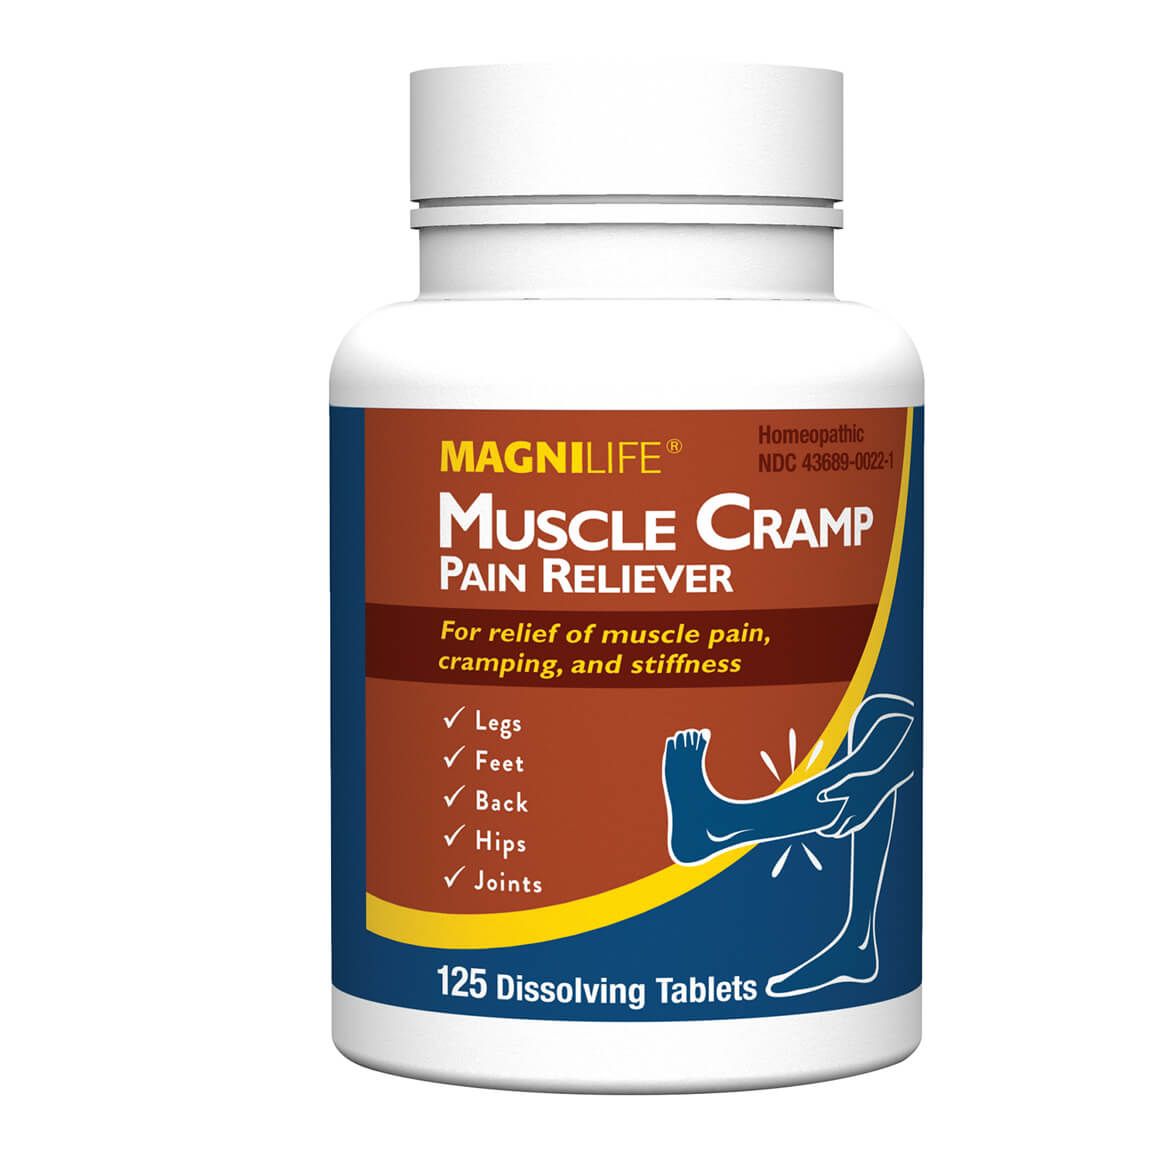 MagniLife® Muscle Cramp Pain Reliever Dissolving Tablets + '-' + 359088